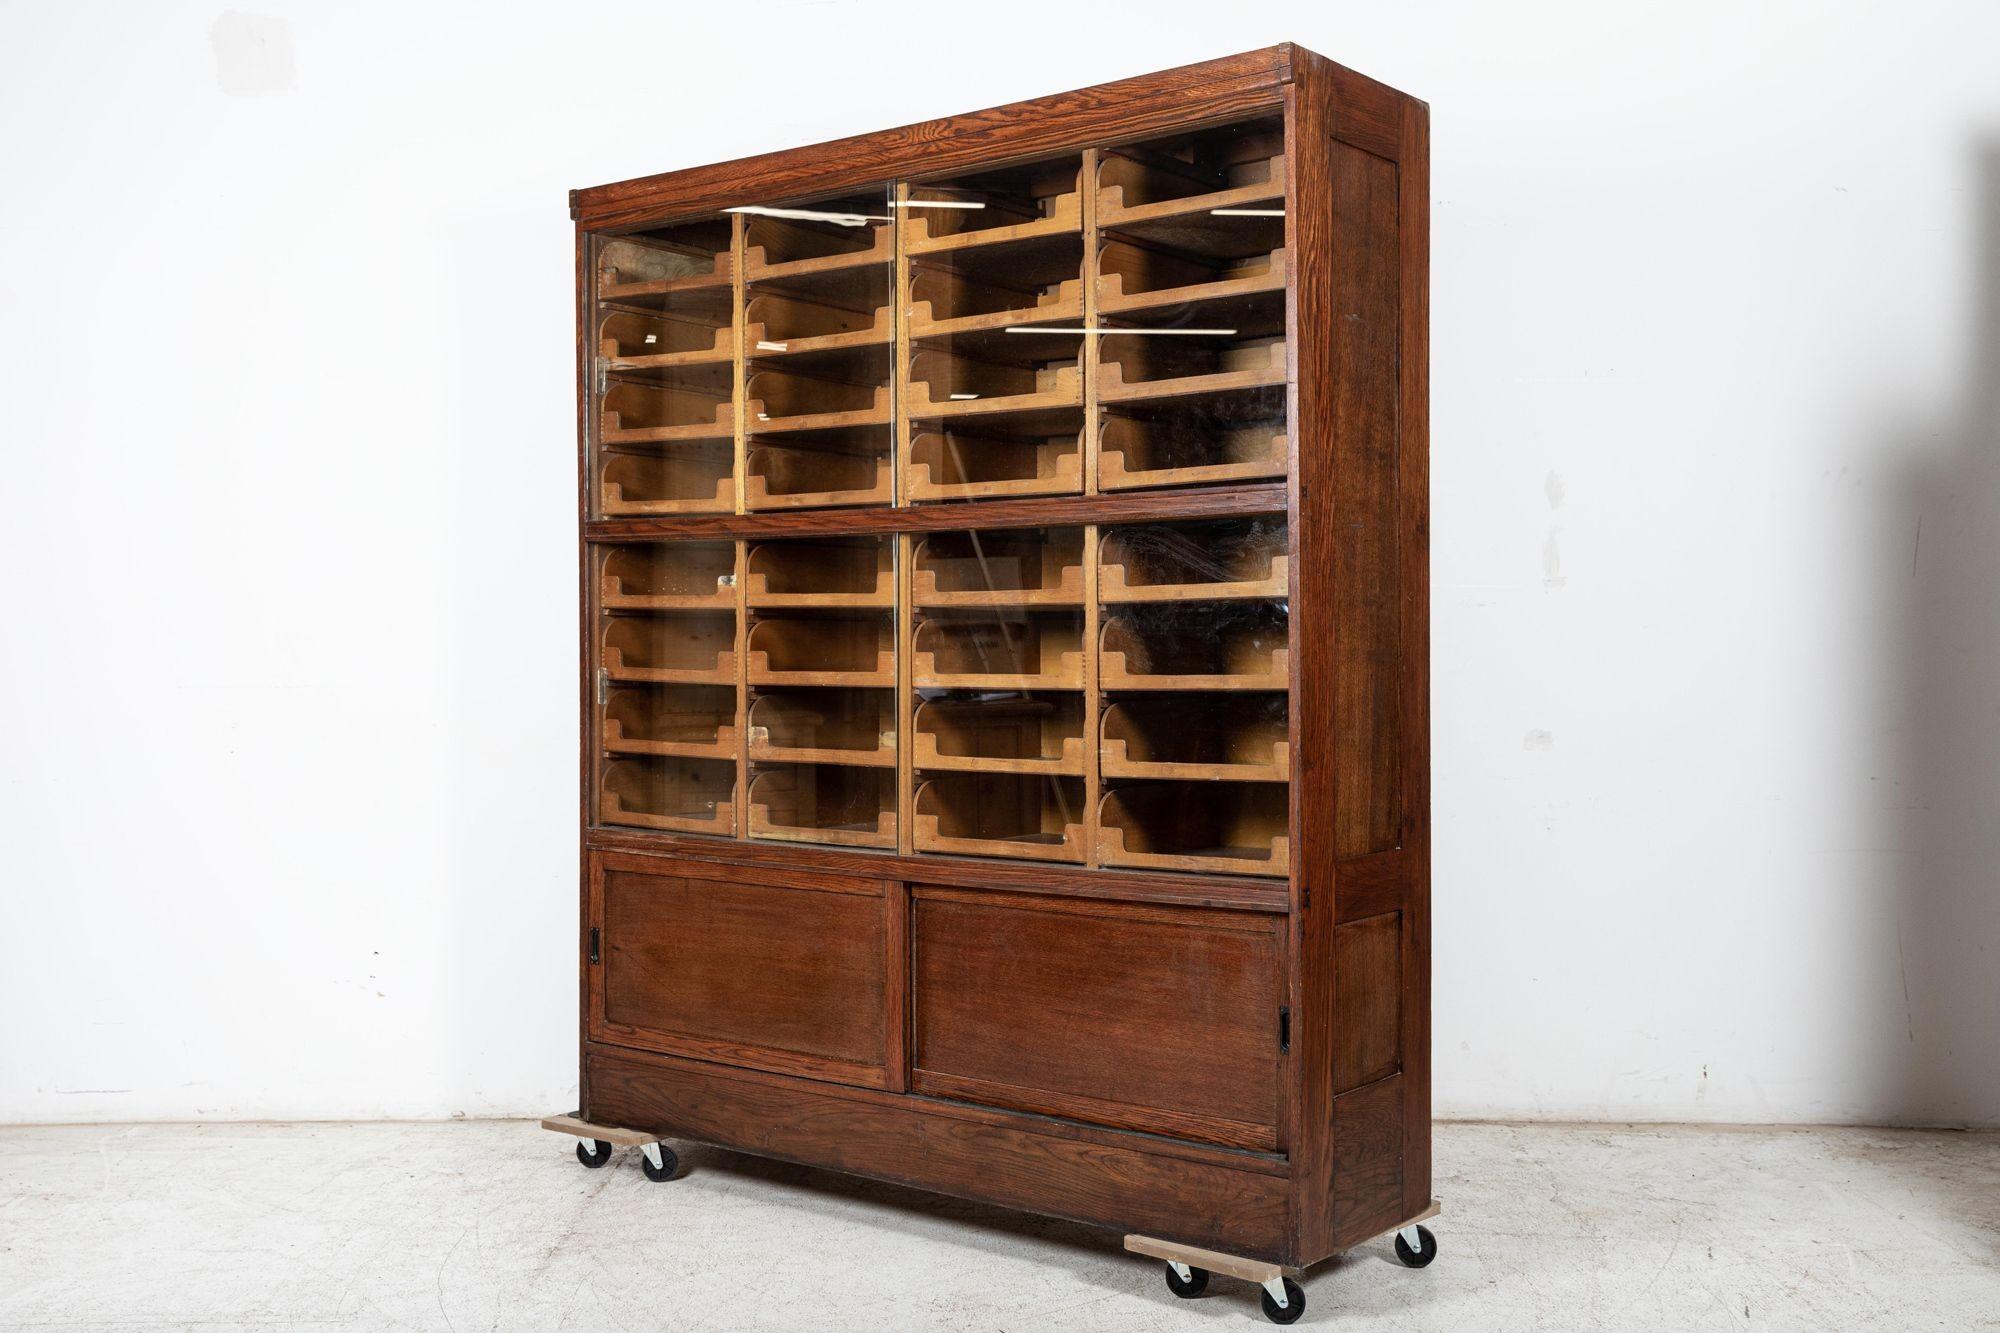 Circa 1930
Large English glazed oak Haberdashery Shop Fitters cabinet.
With 36 drawers, original sliding glass doors and hardware.
(1 section/Piece)
W177 x D50 x H198 cm
Inner drawer size W40xD40xH13cm.
 